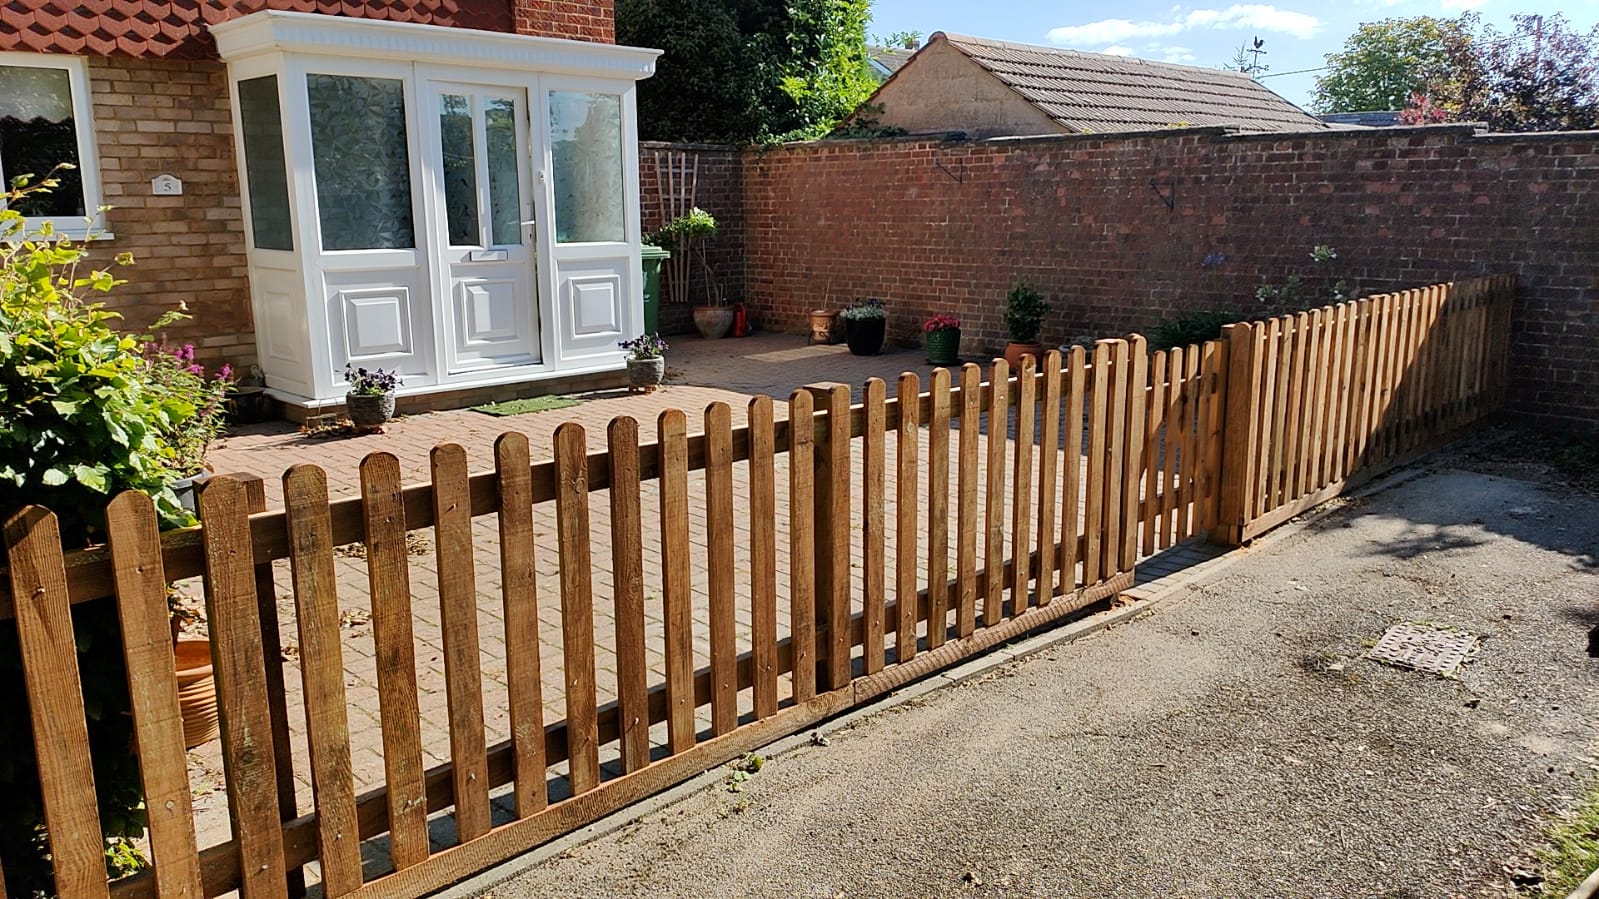 3 ft high open slatted picket fence giving a very open feel and view.